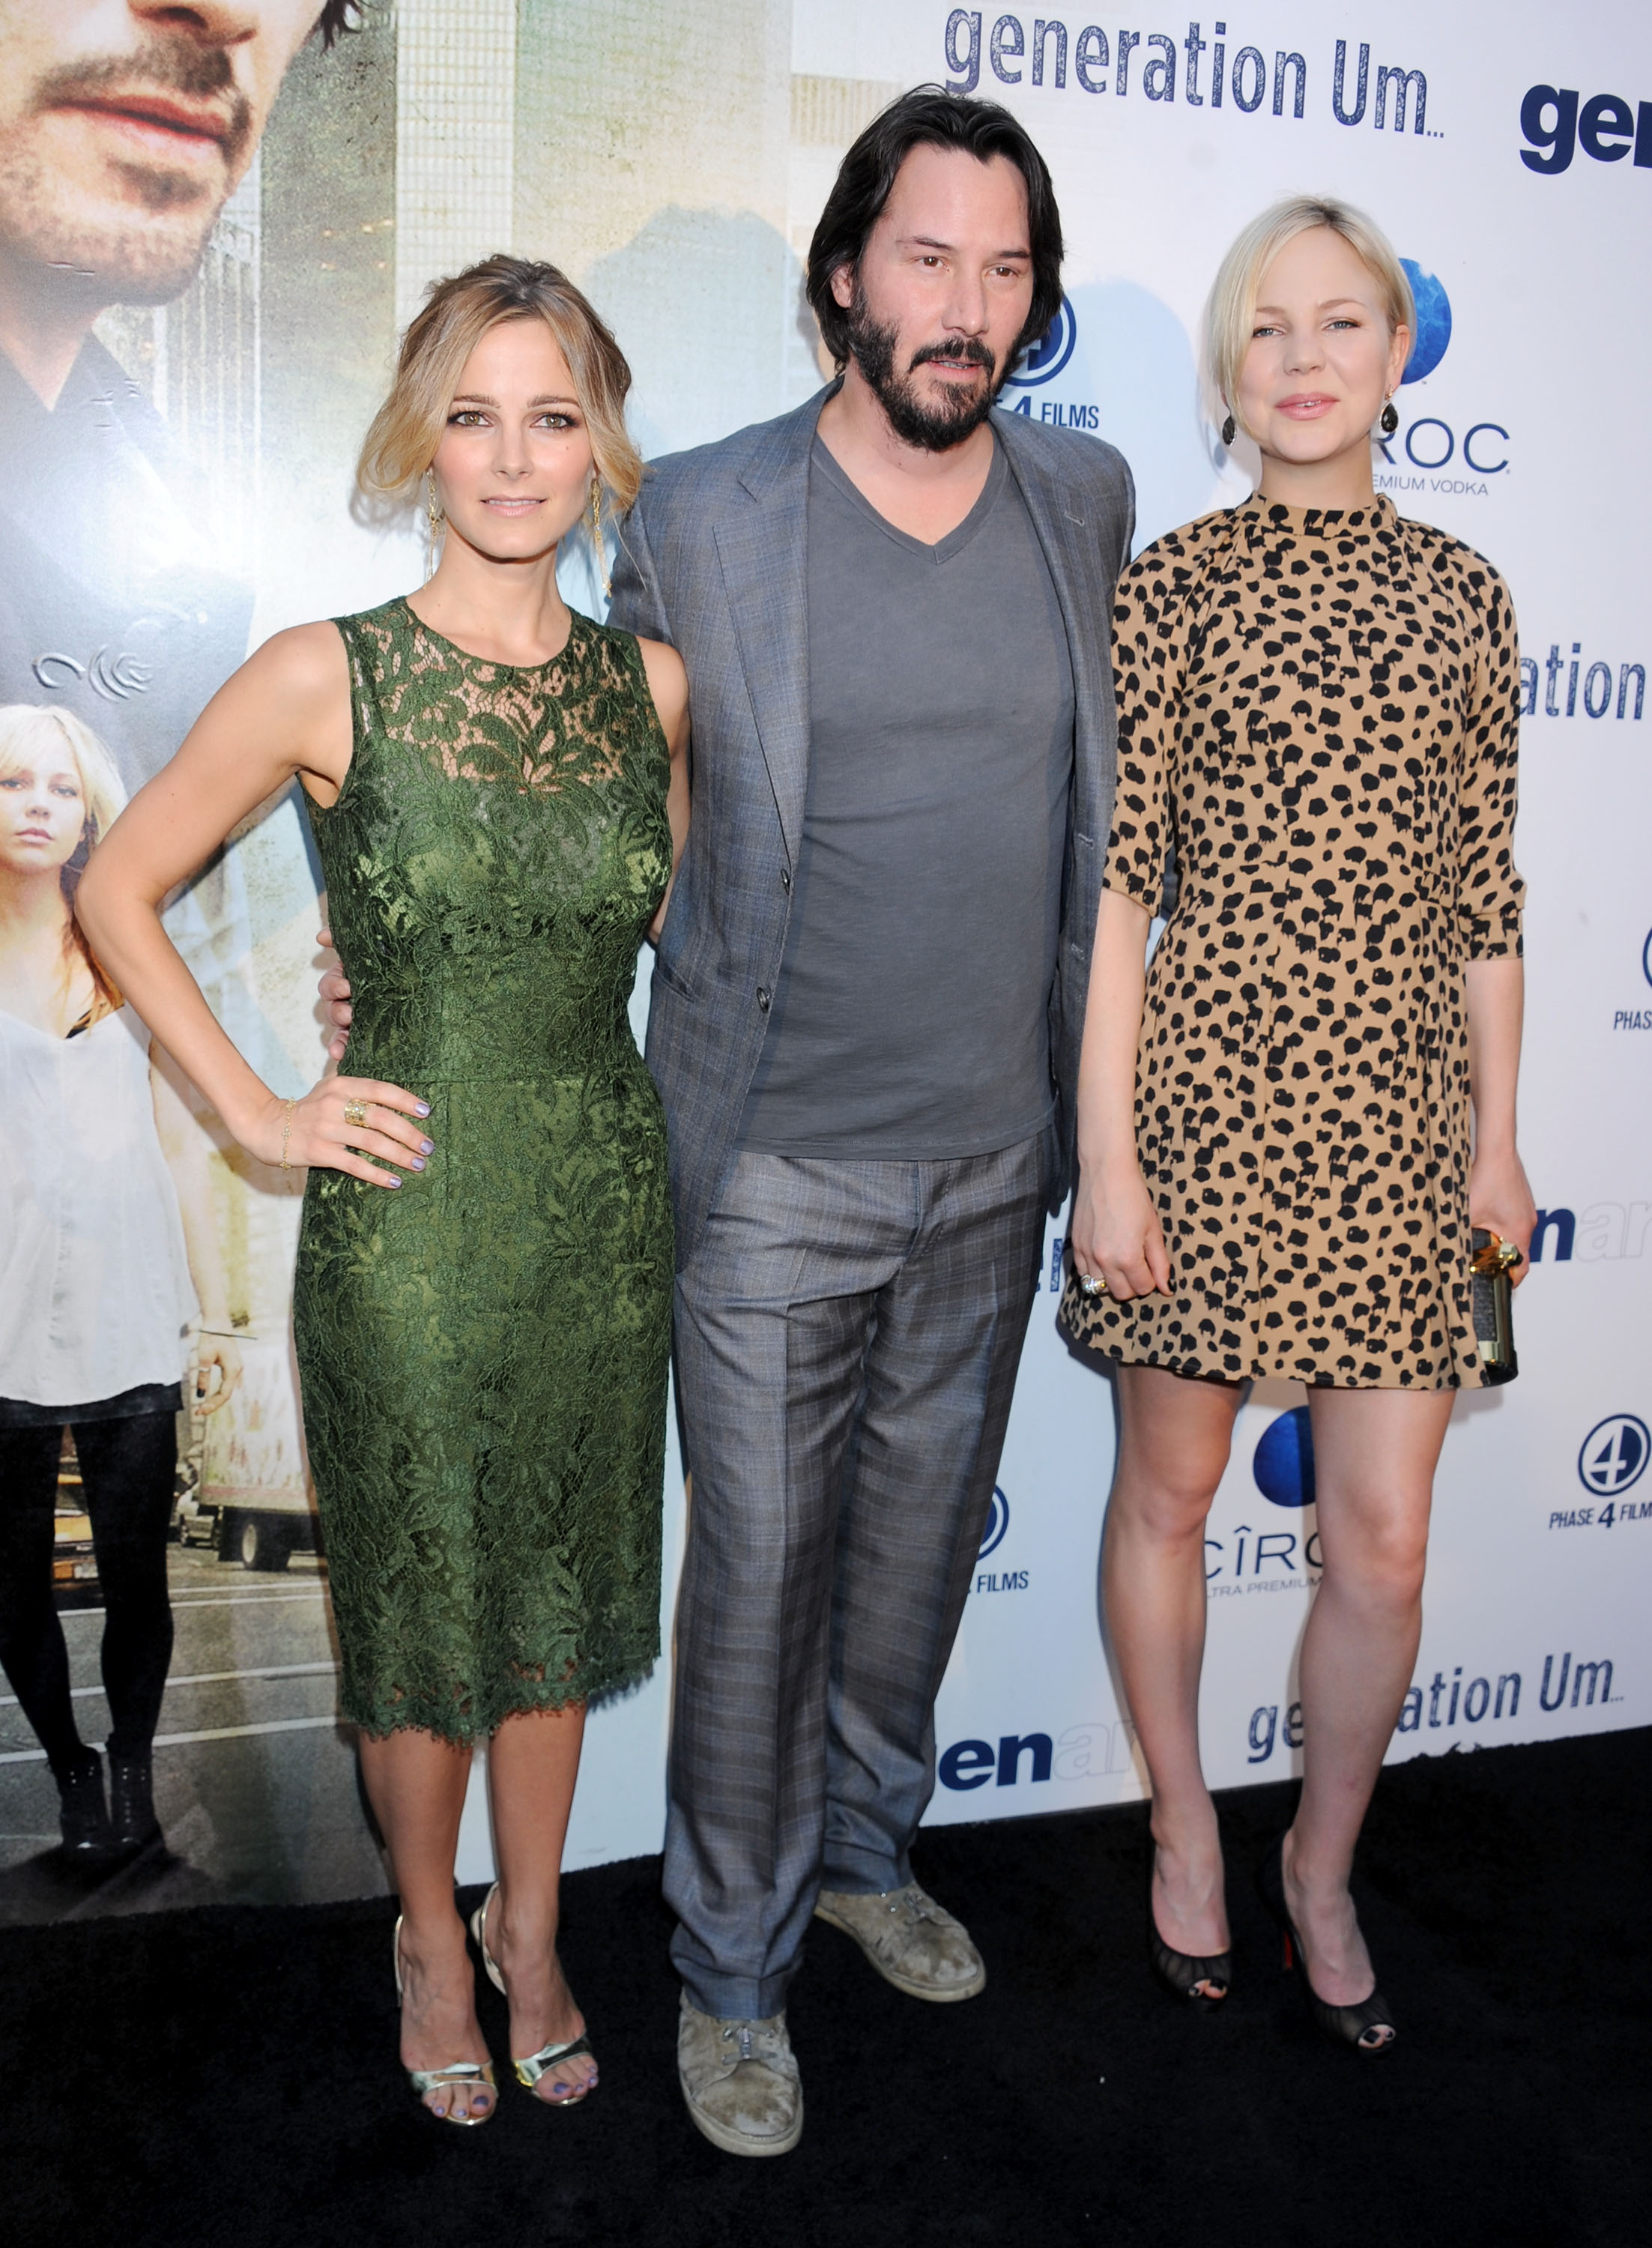 Bojana Novakovic, Keanu Reeves, and Adelaide Clemens arrive at the Los Angeles premiere of "Generation UM" at ArcLight Hollywood, on May 2, 2013, in Hollywood, California. | Source: Getty Images